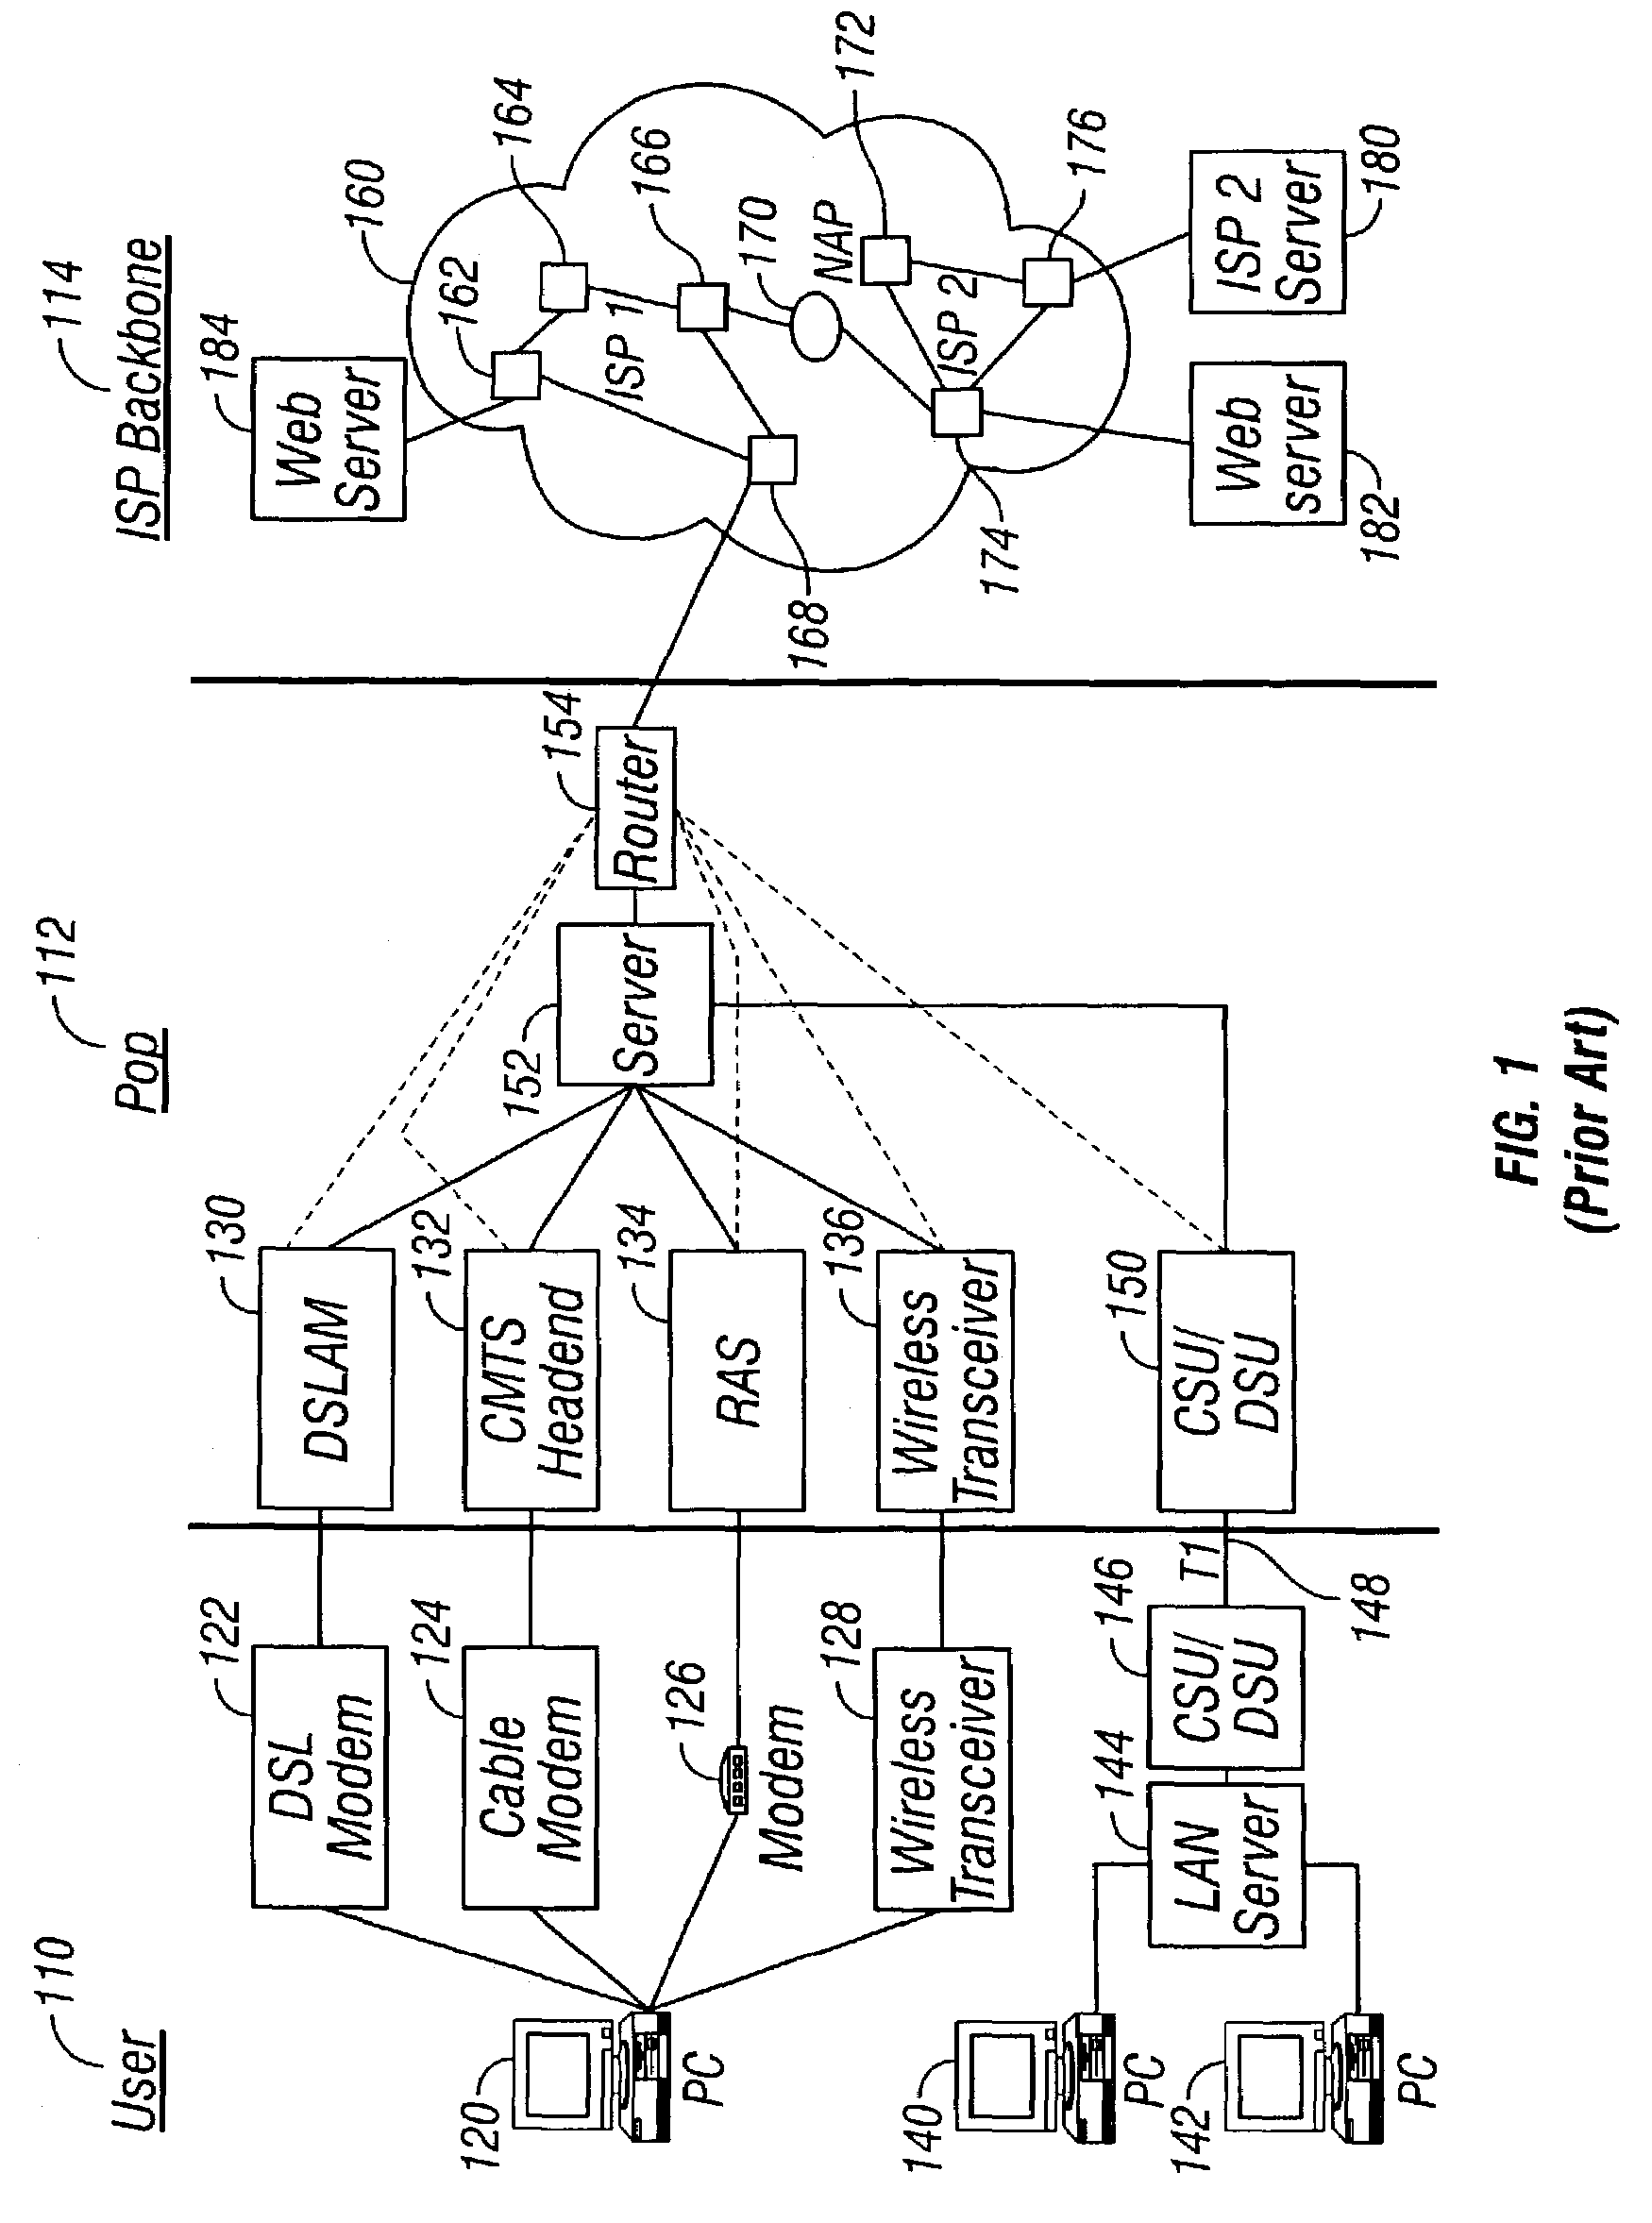 System and method for increasing the effective bandwidth of a communications network